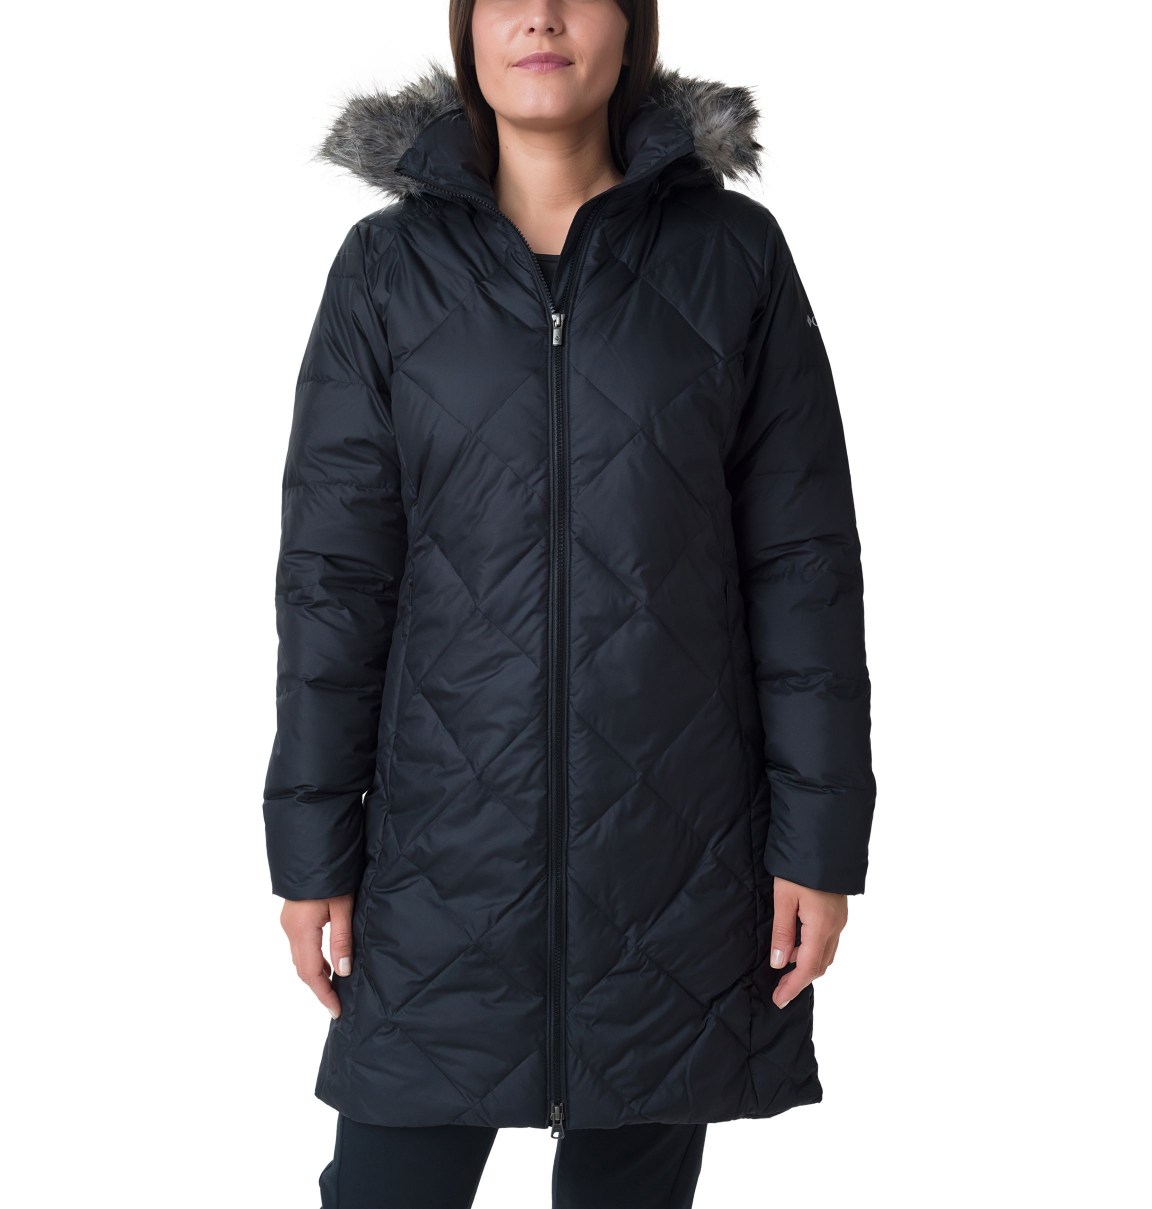 CHAQUETON ICY HEIGHTS II MID LENGTH STORM-LITE DP II 100% POLYESTER 450 FILL POWER INSULATION RDS CERTIFIED WATER RESISTANT BLACK